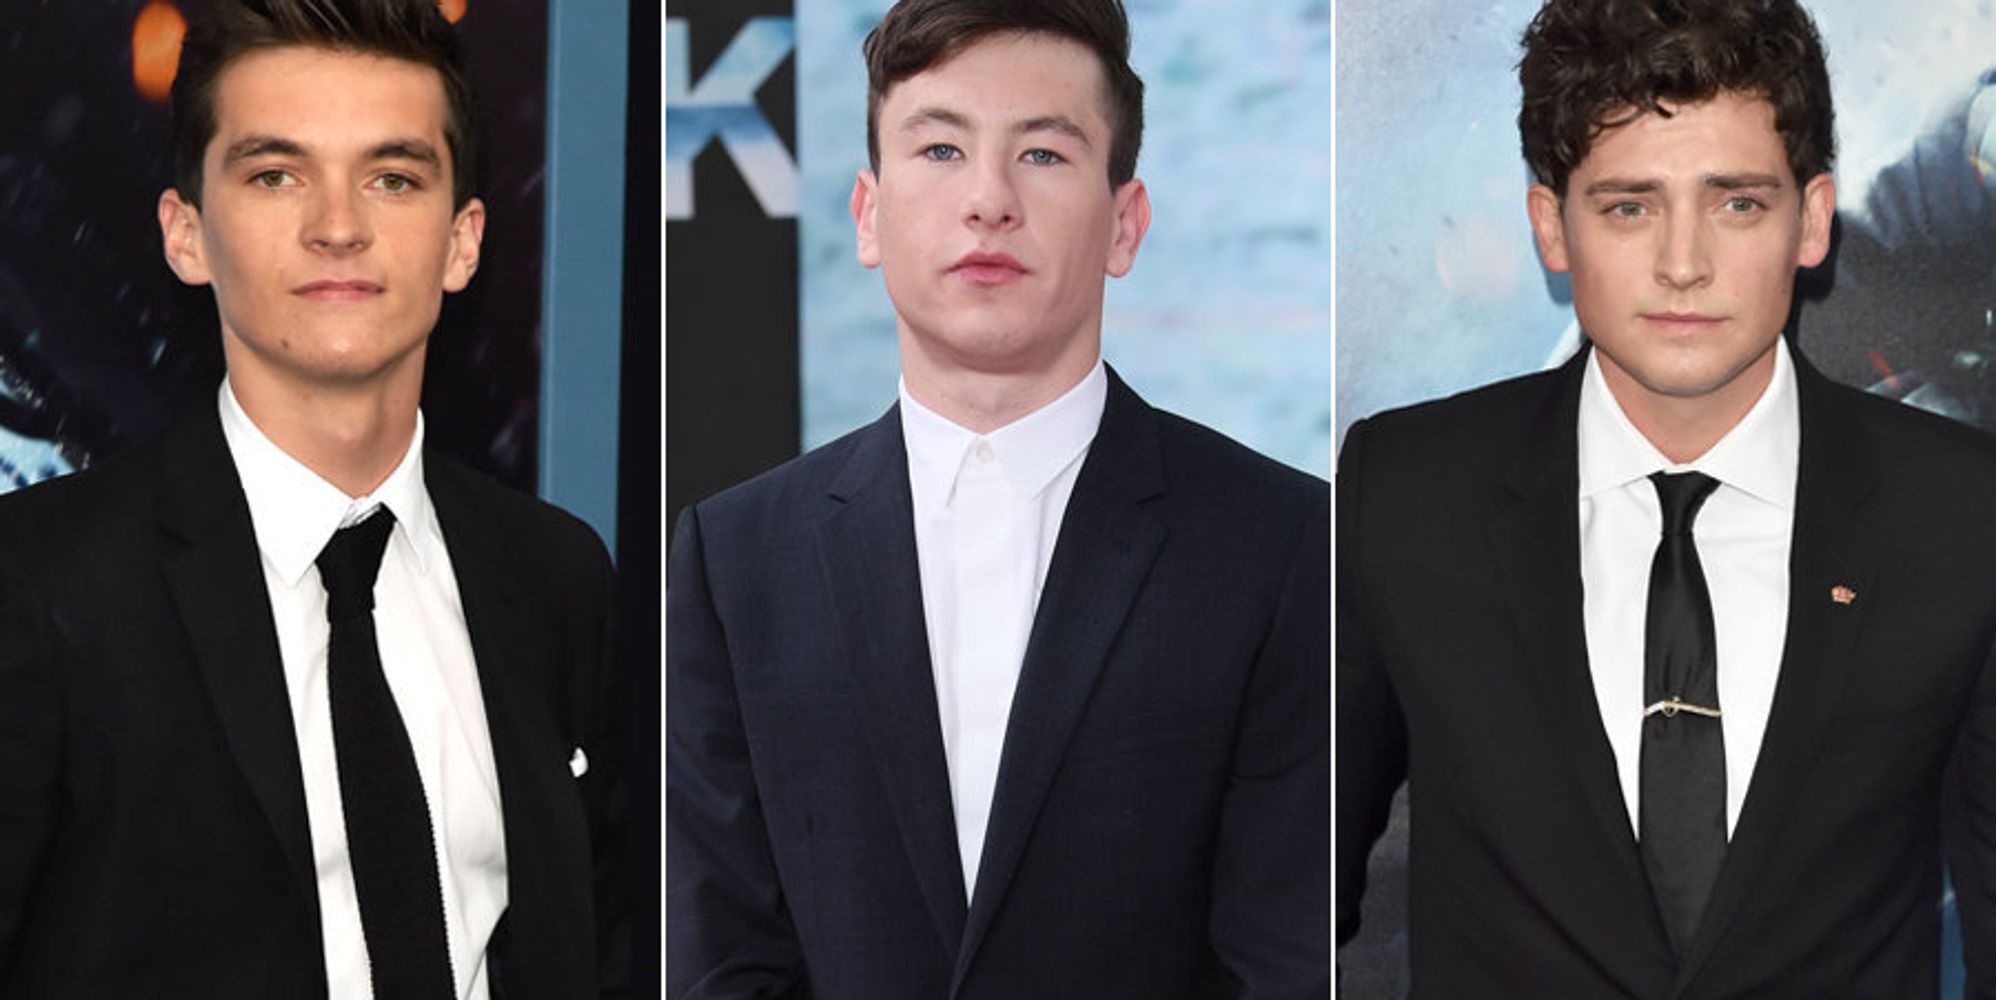 ‘Dunkirk’ Cast: From Fionn Whitehead To Aneurin Barnard - Where You’ve